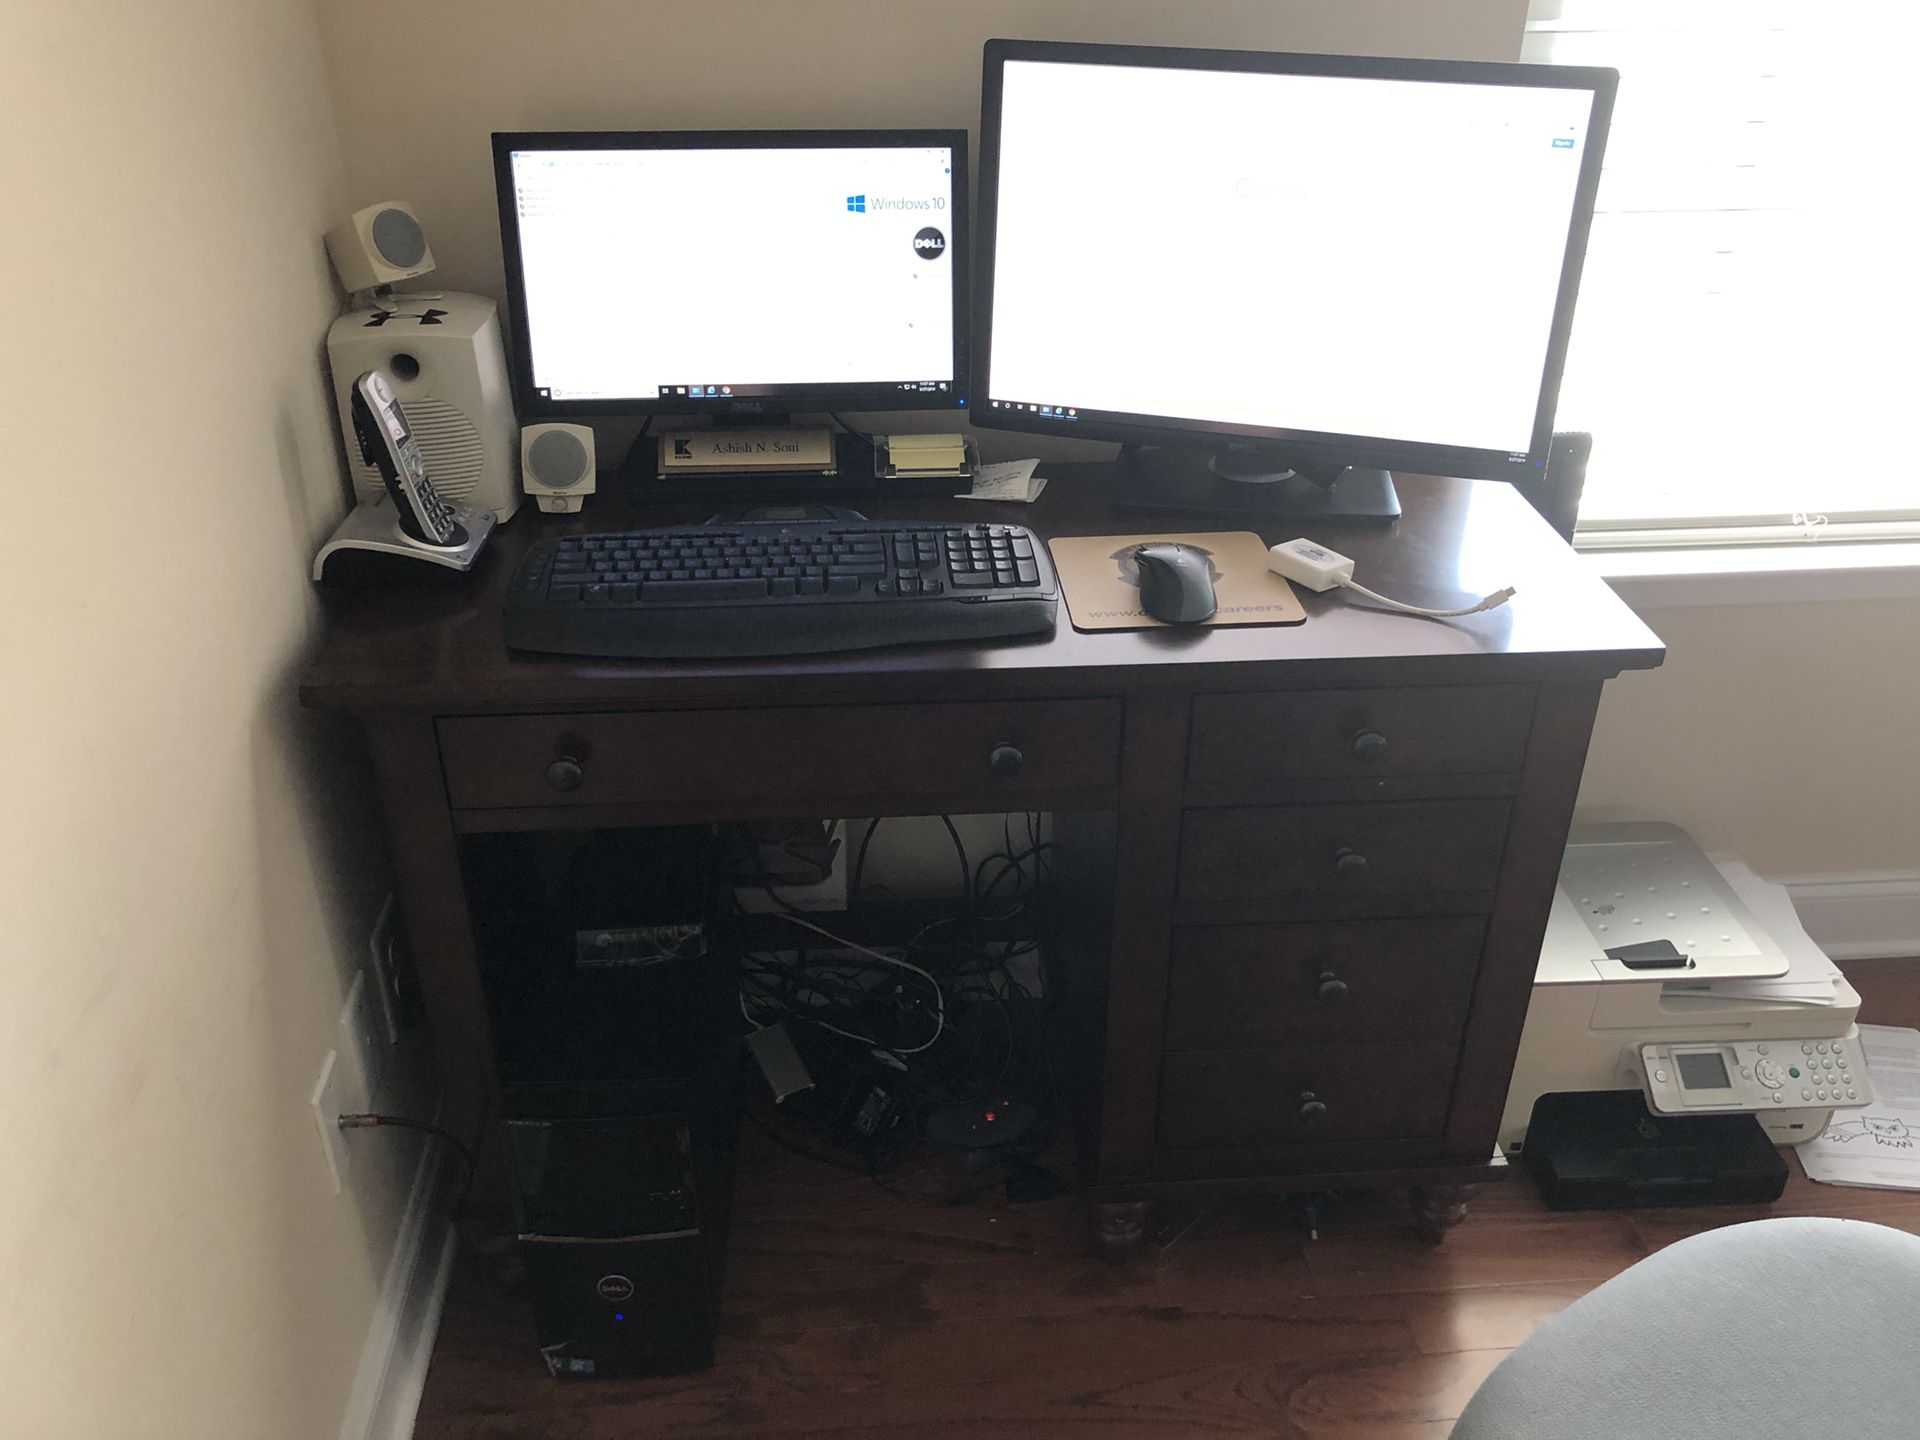 Dell Vostro Desktop like new with dual monitor